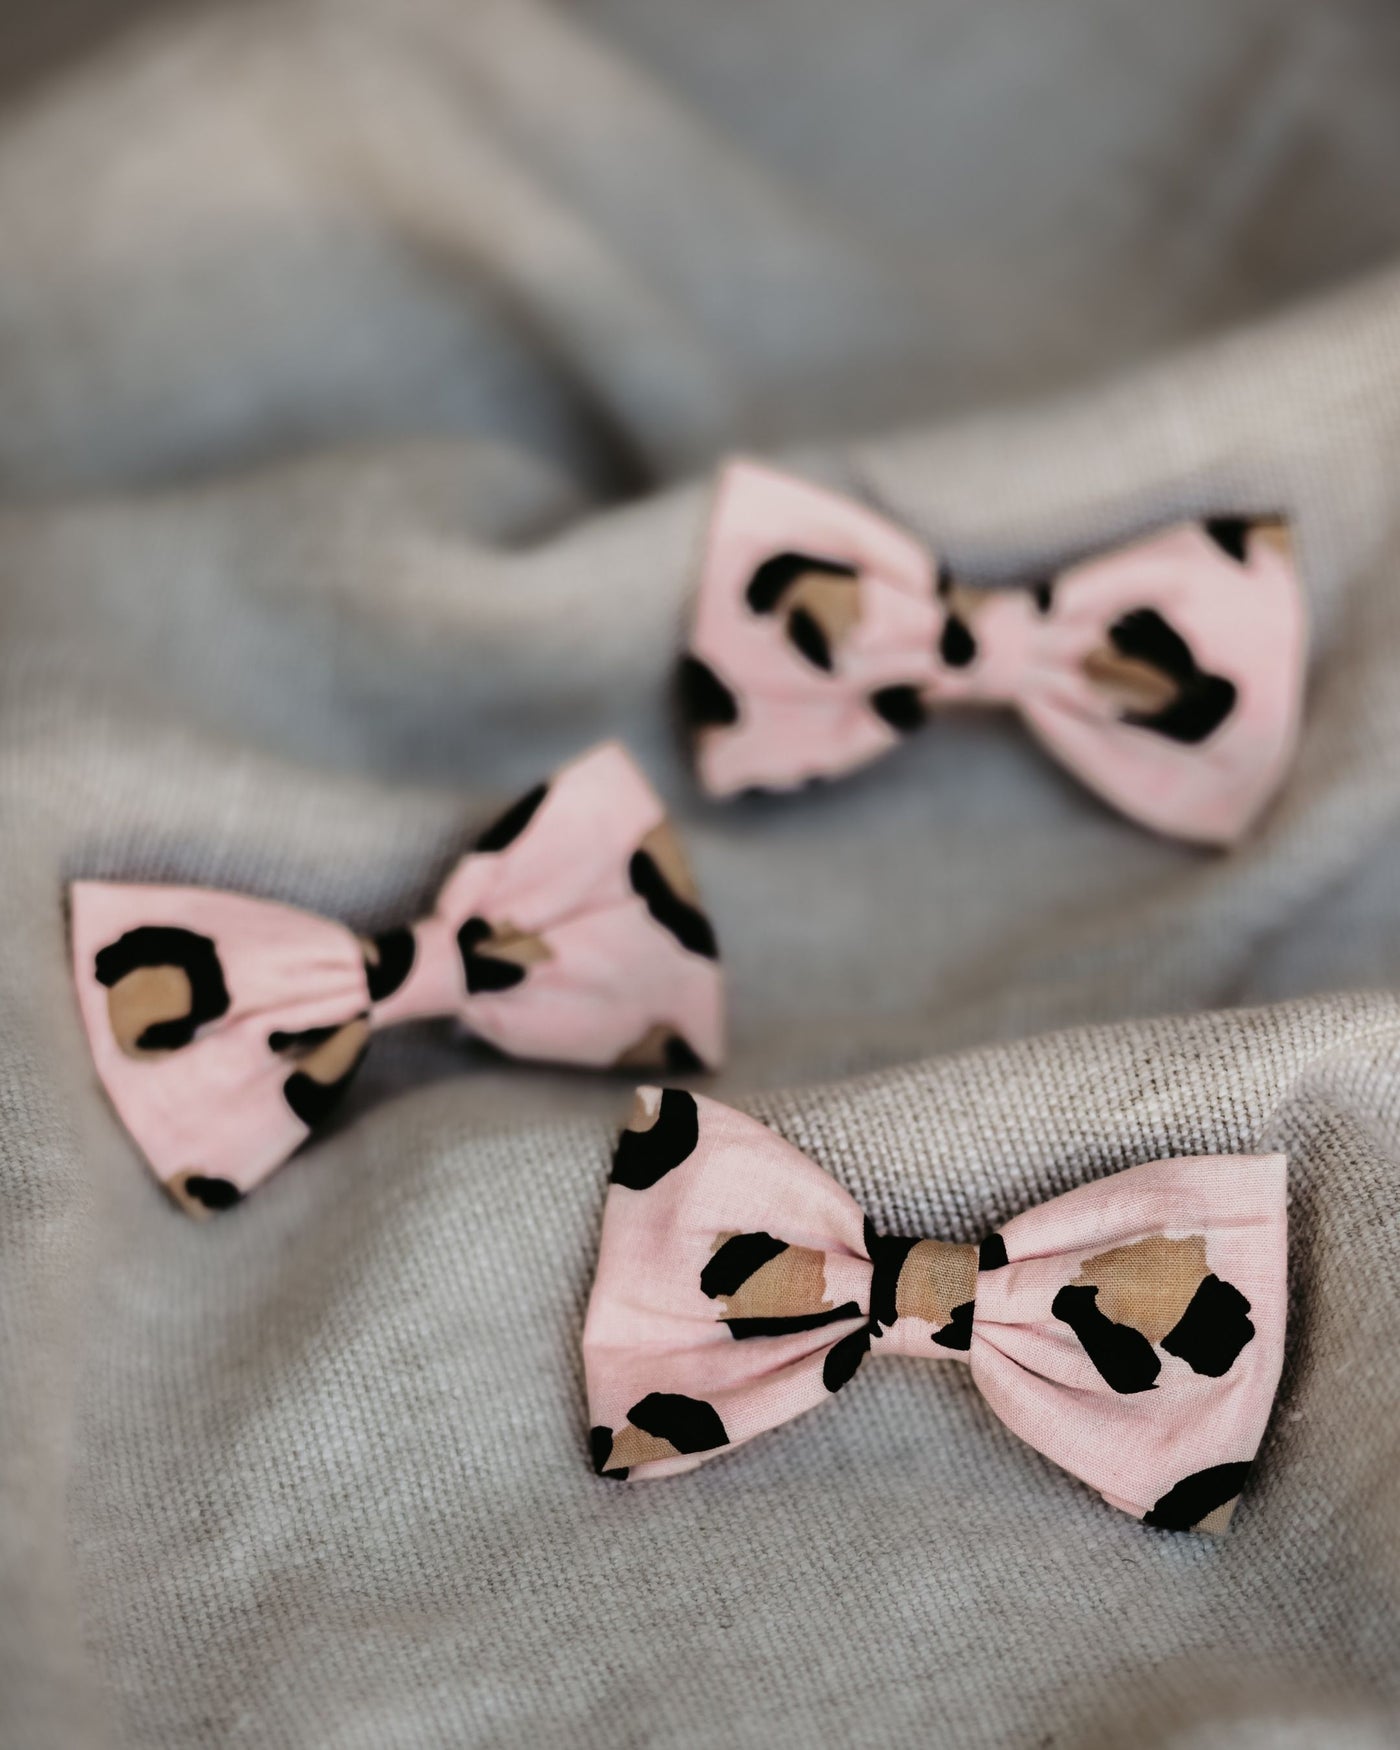 Juno Peach Leopard Bow Tie Product Image Detail